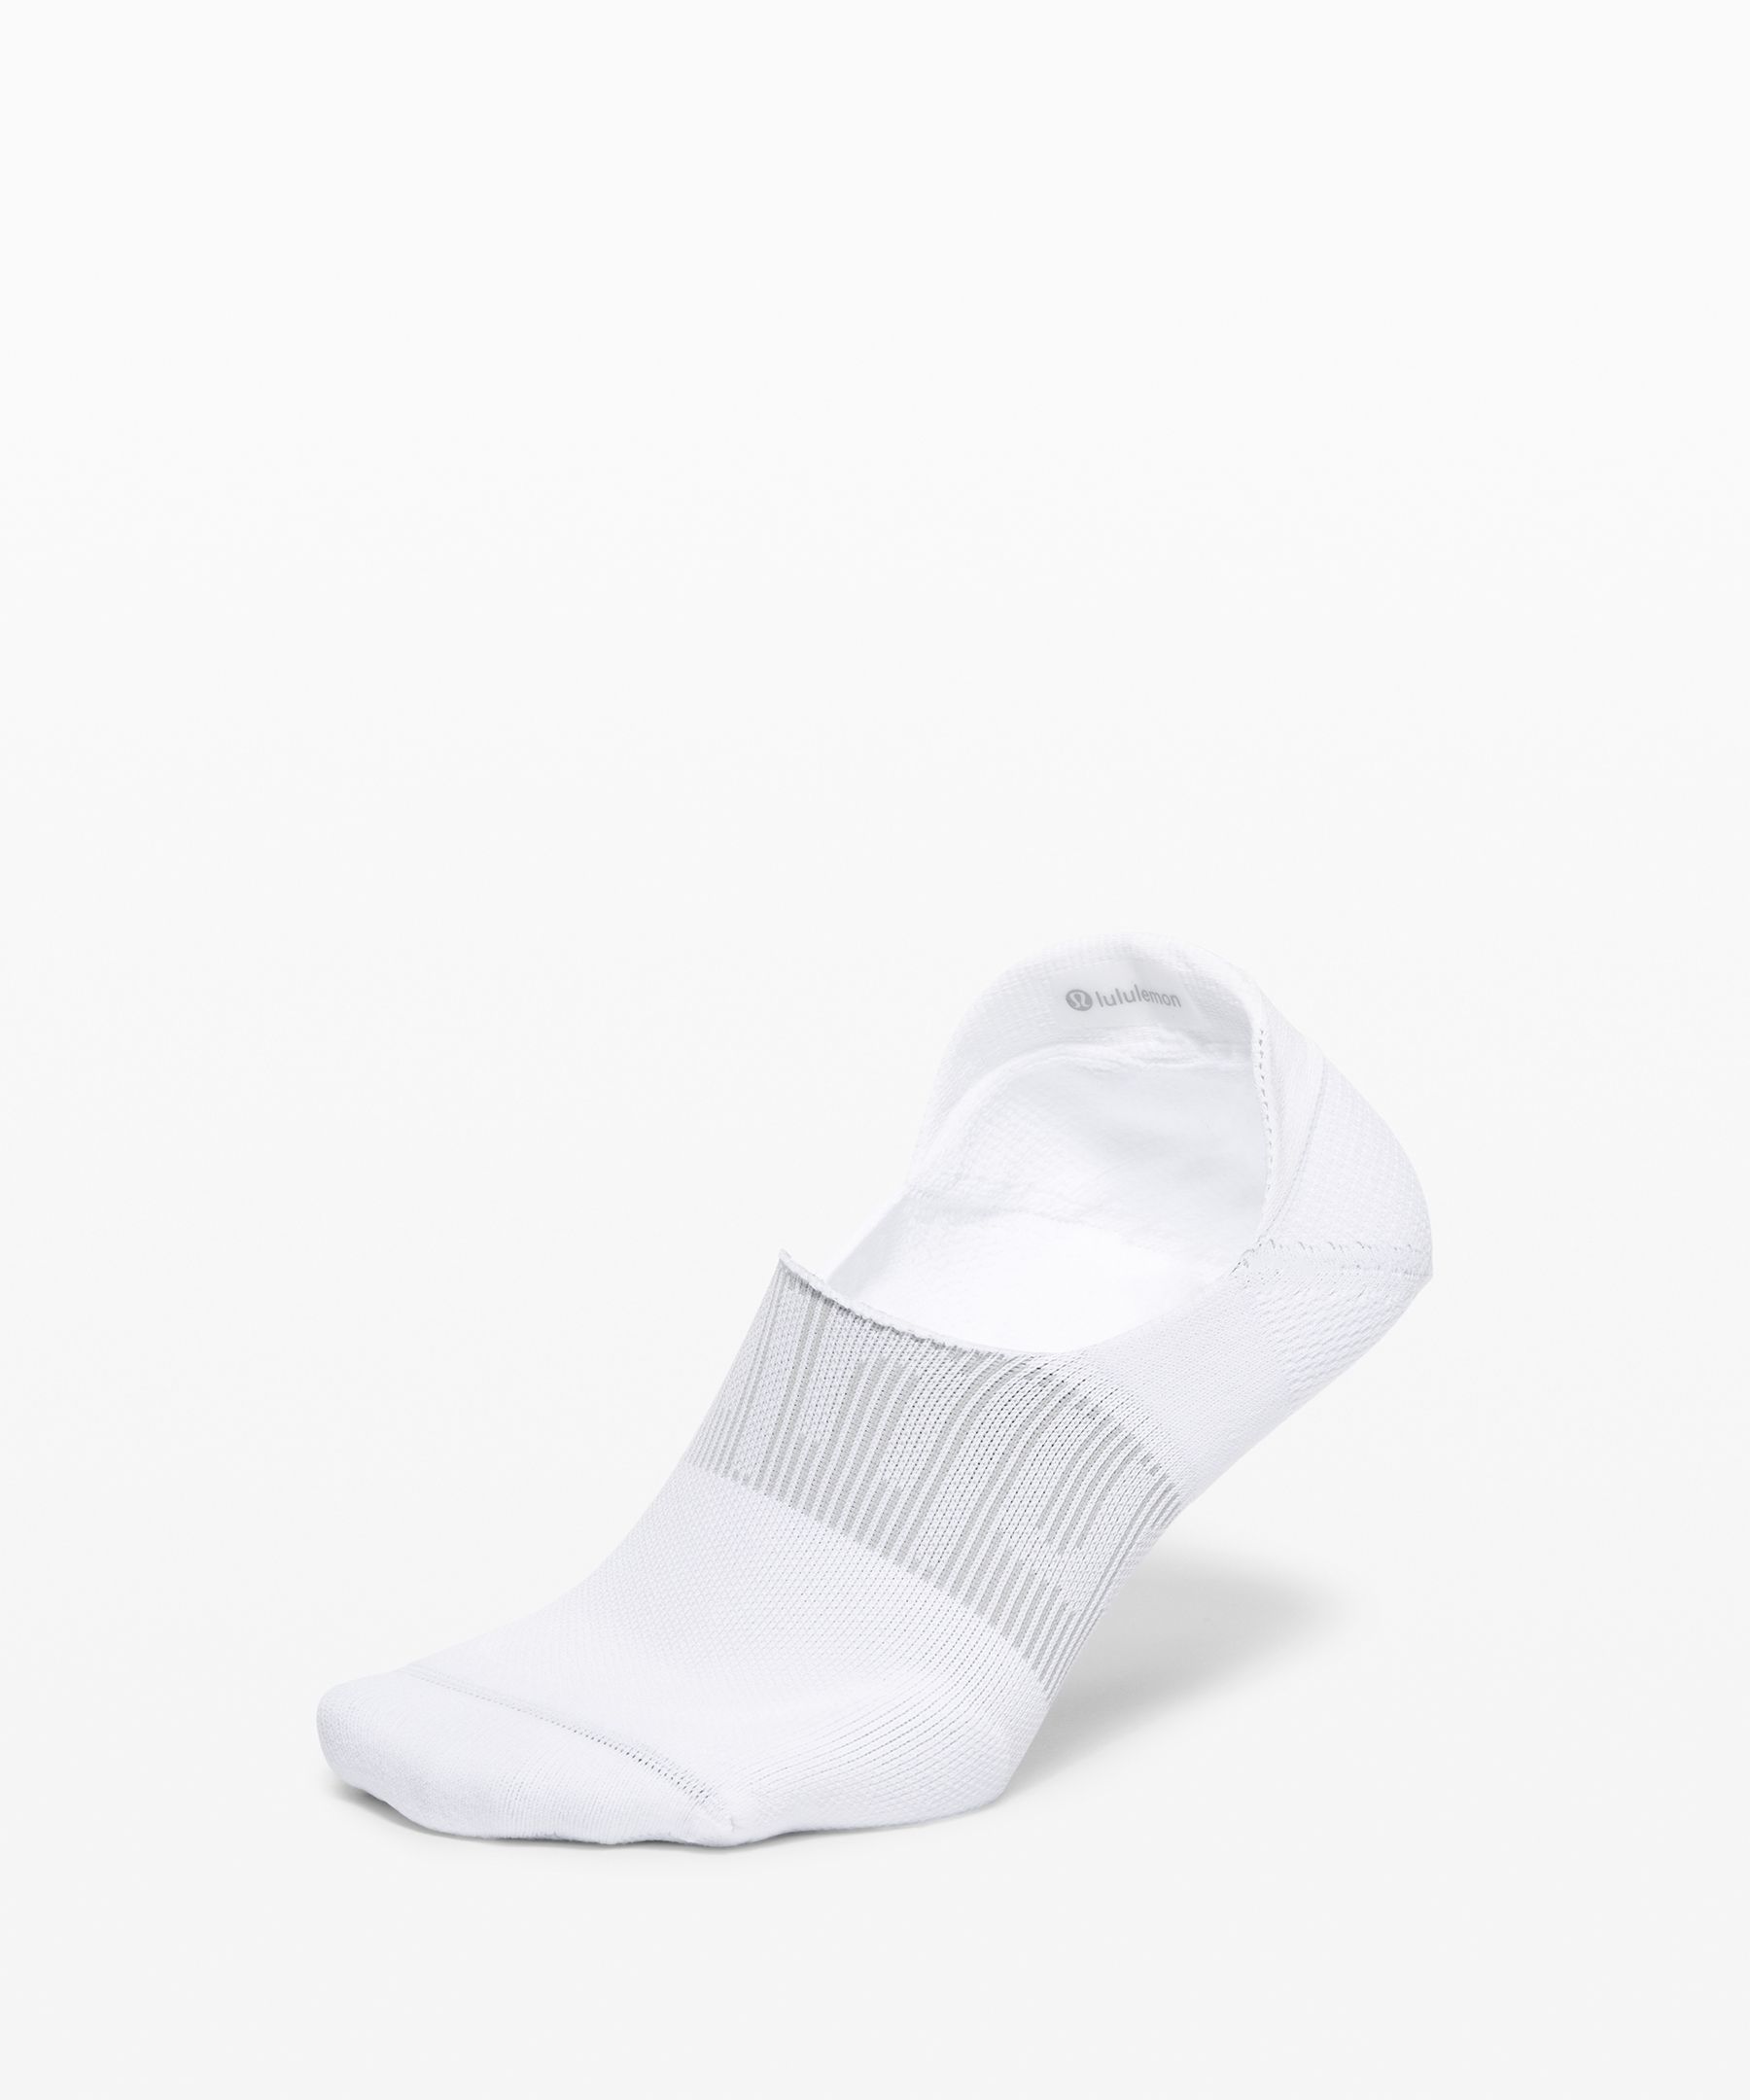 Lululemon Power Stride No-show Socks With Active Grip In White